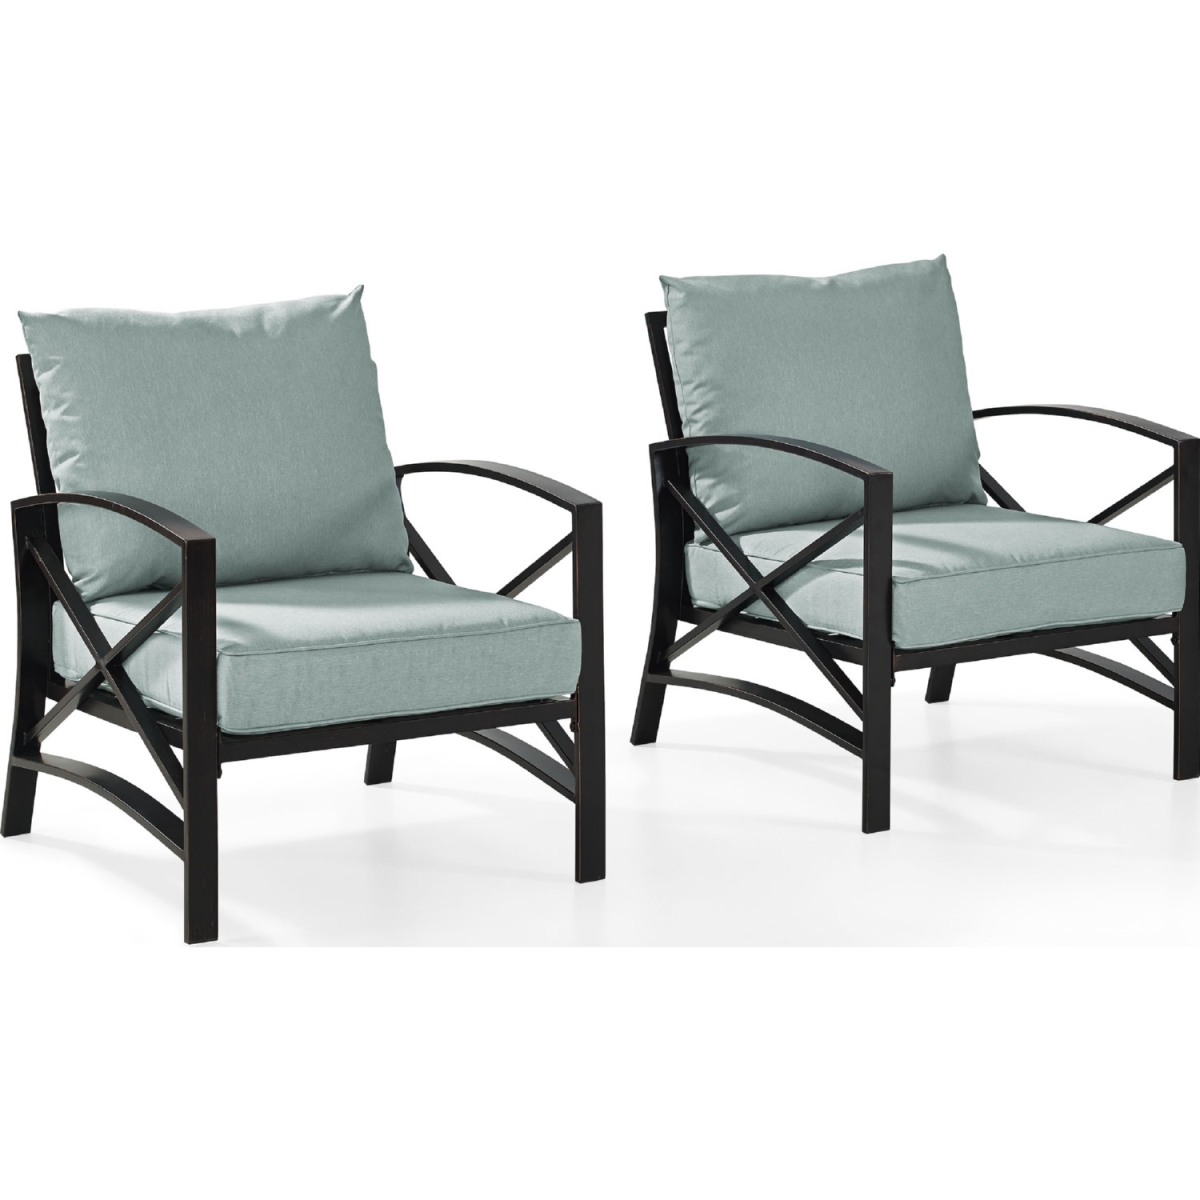 2 Piece Kaplan Outdoor Seating Set With Mist Cushion - Two Kaplan Outdoor Chairs